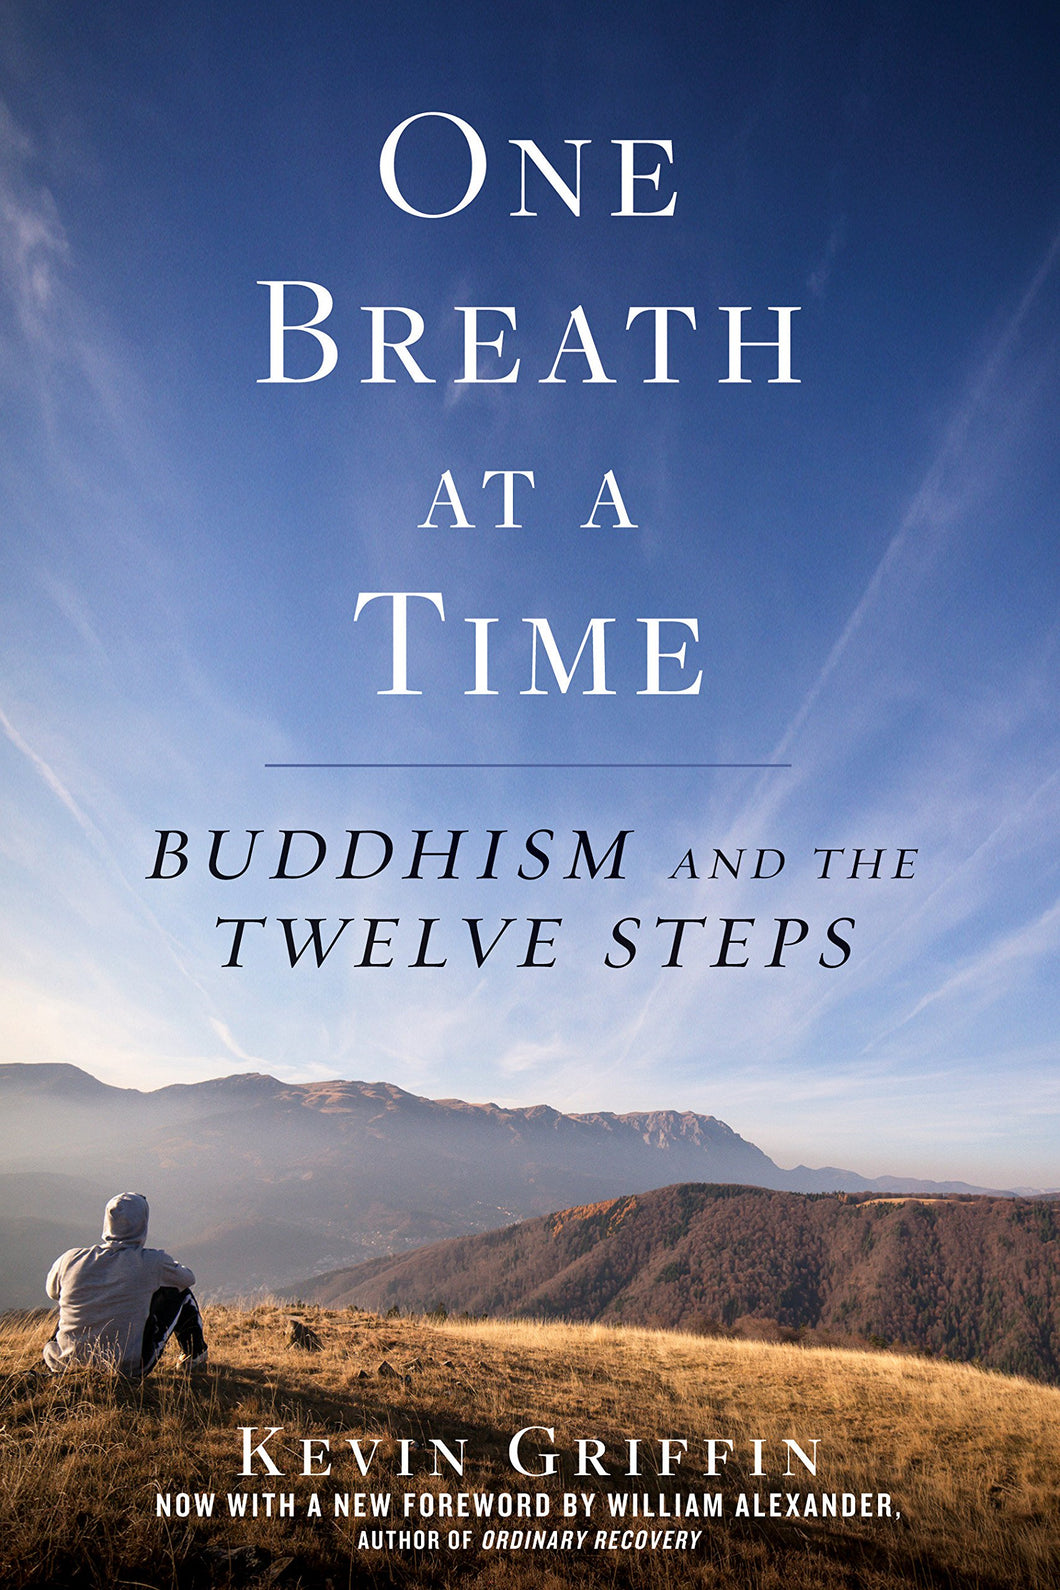 One Breath at a Time: Buddhism and the Twelve Steps [Kevin Griffin]